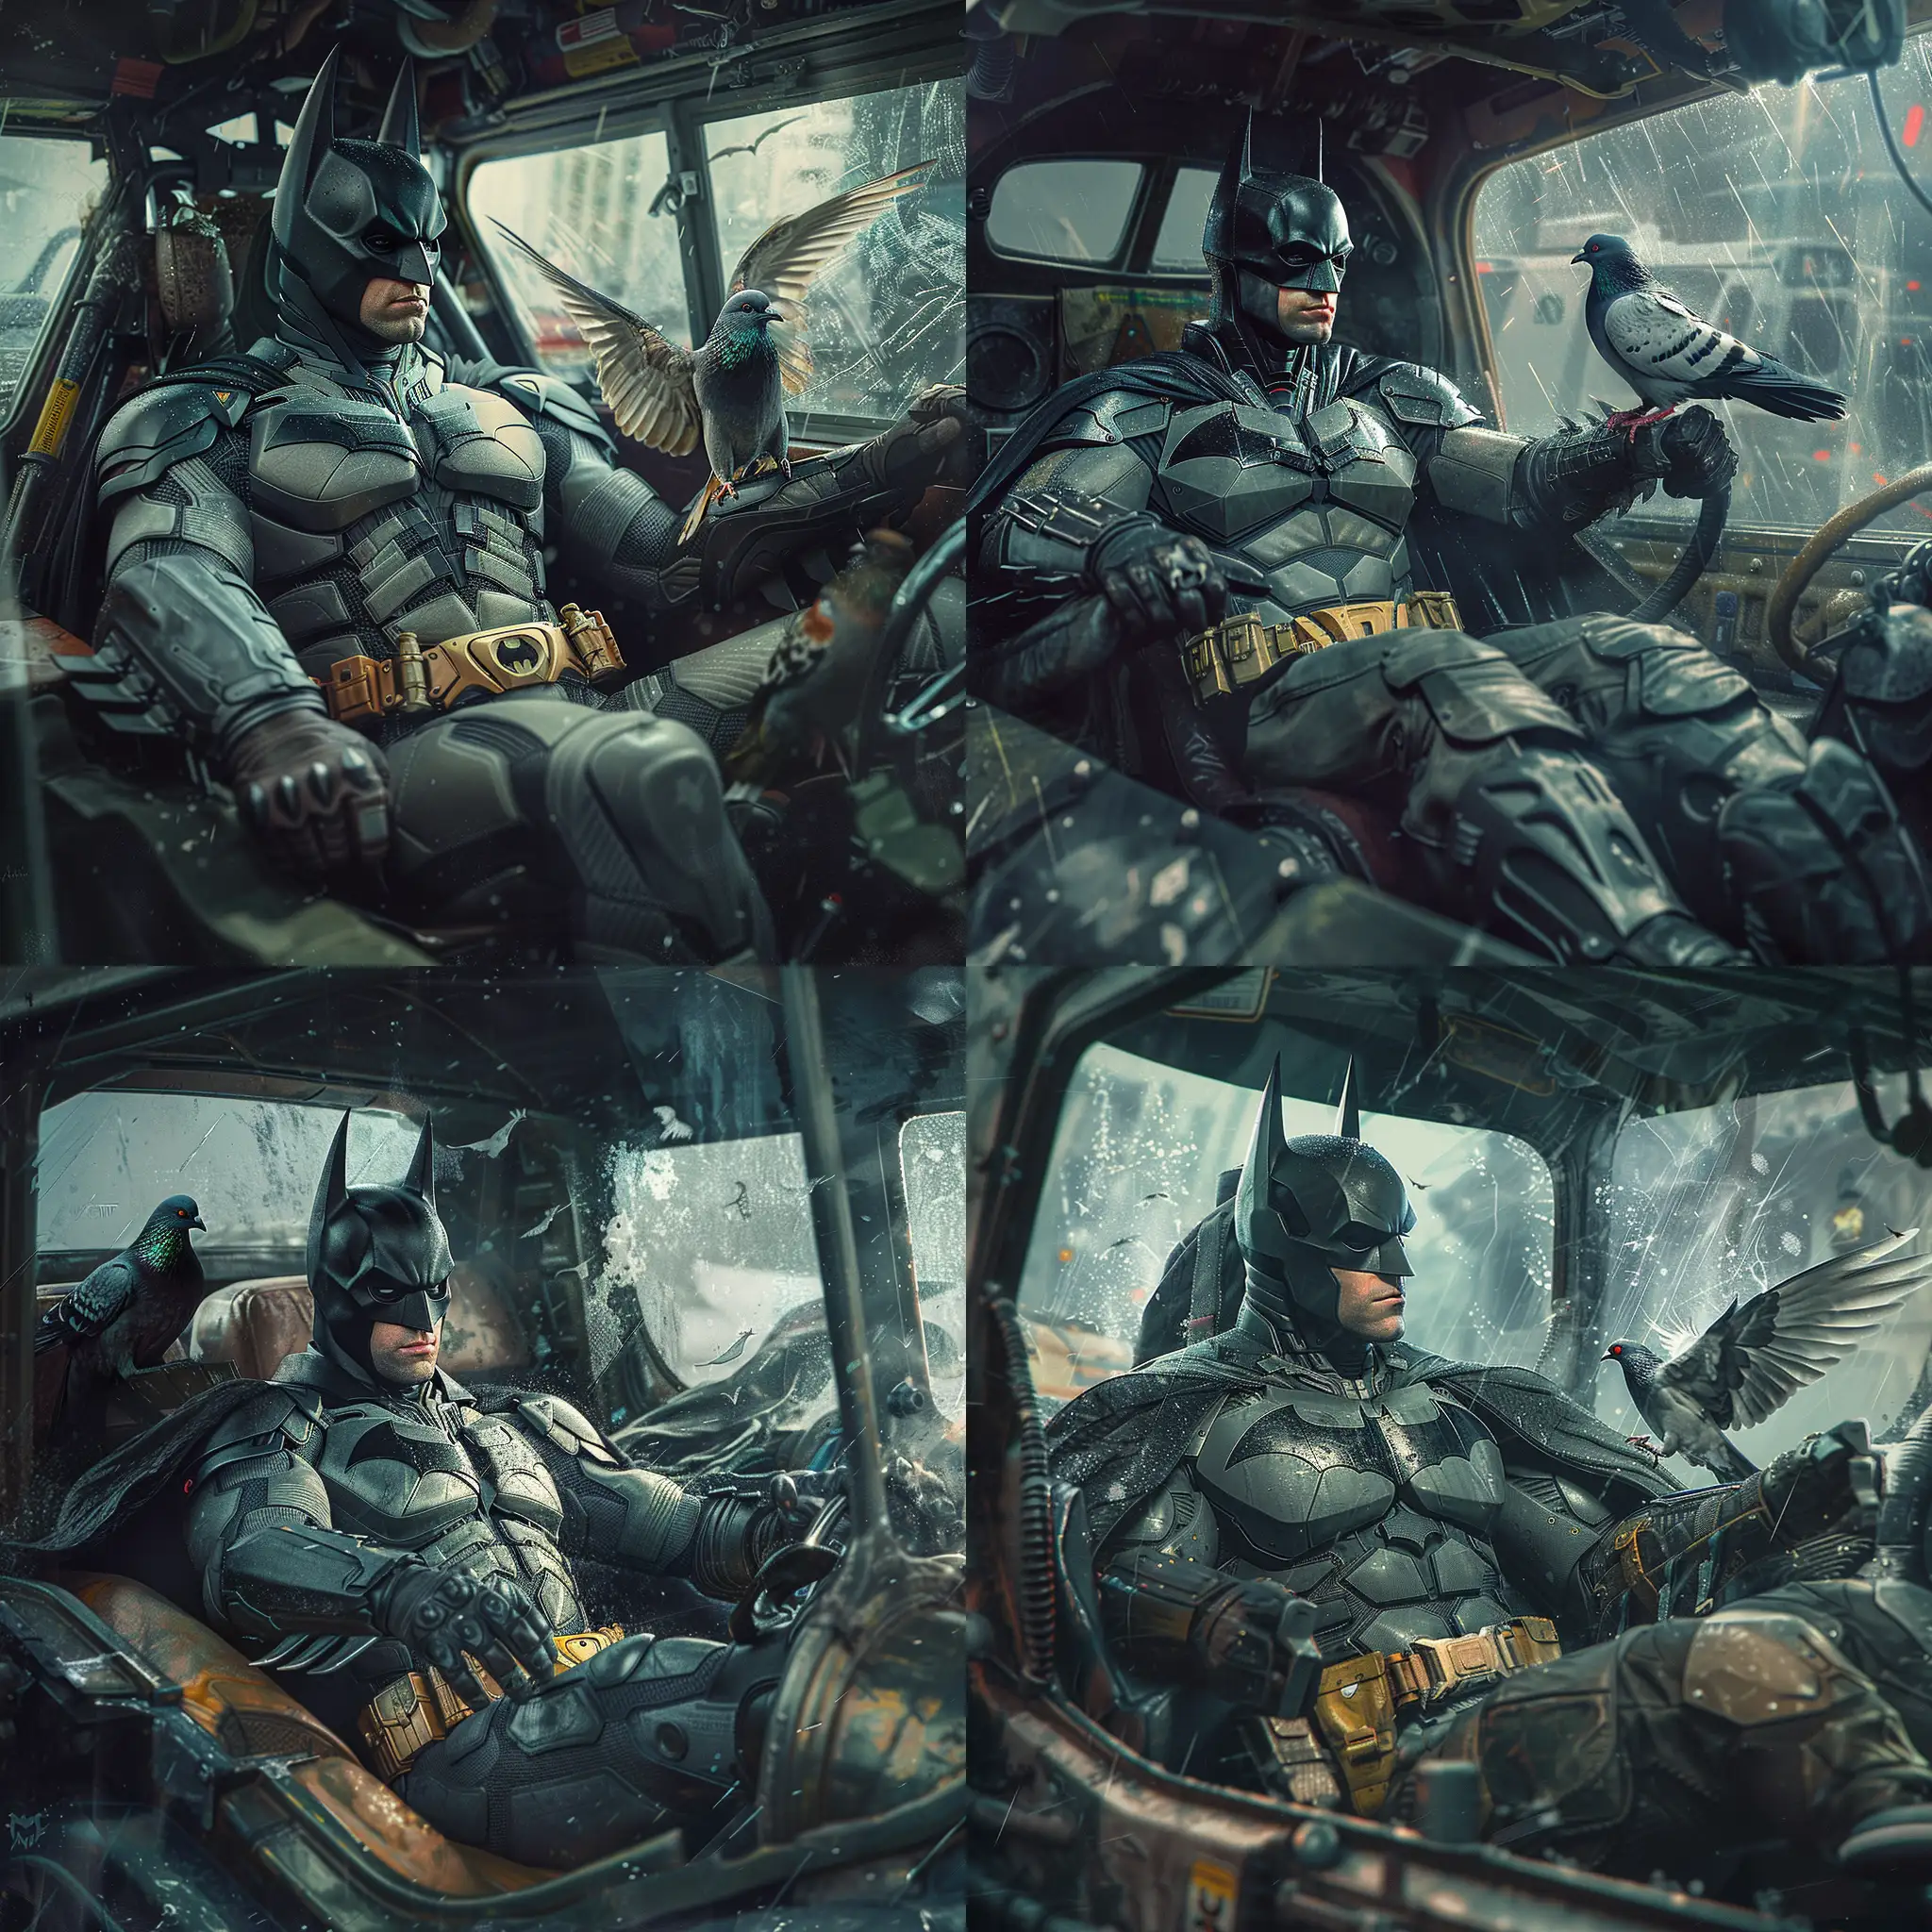 Batman in batmobile with a pigeon in the passenger seat. Cinematic, heroic